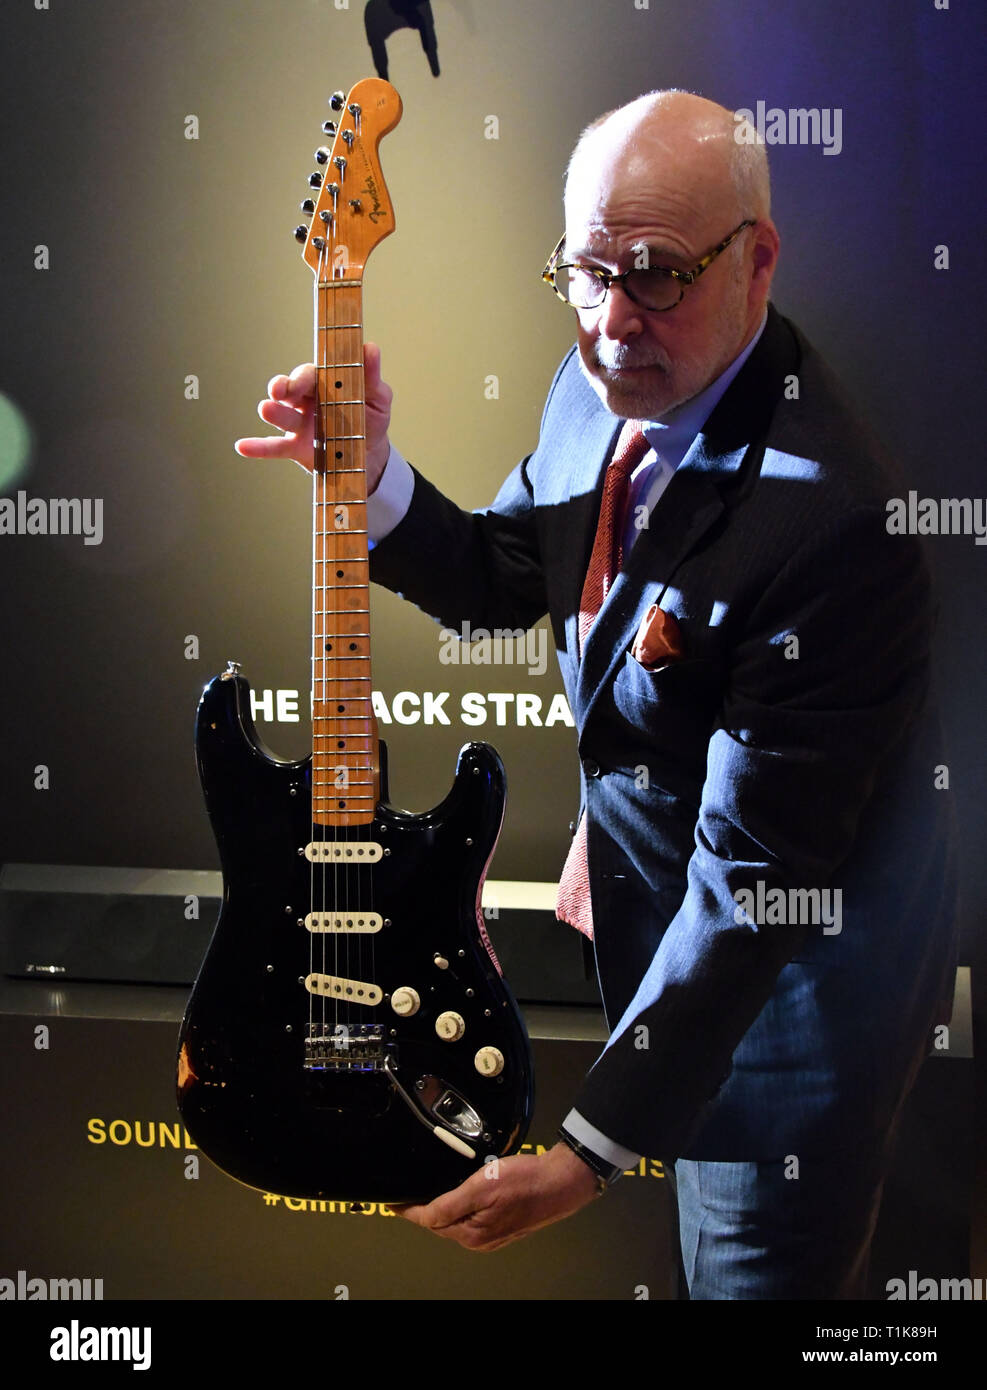 London, UK. 27th Mar, 2019. Kerry Keane, Christie's Musical Instruments  Specialist with The Black Strat, 1969, estimate $100,000-150,000 at  Christie's preview of the personal guitar collection of Pink Floyd legend  David Gilmour,